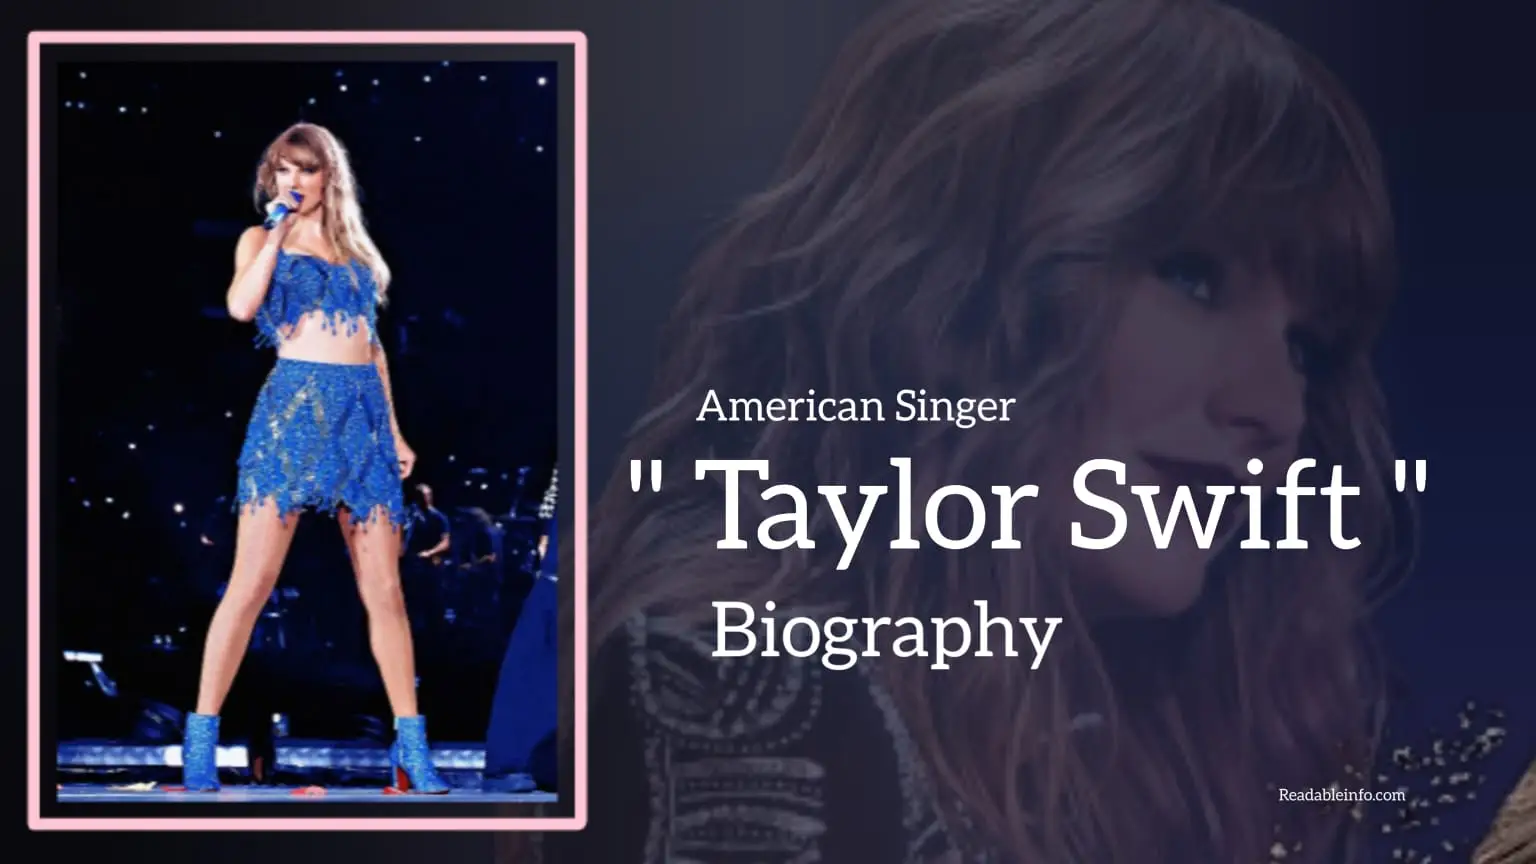 You are currently viewing Taylor Swift Biography (American Singer)